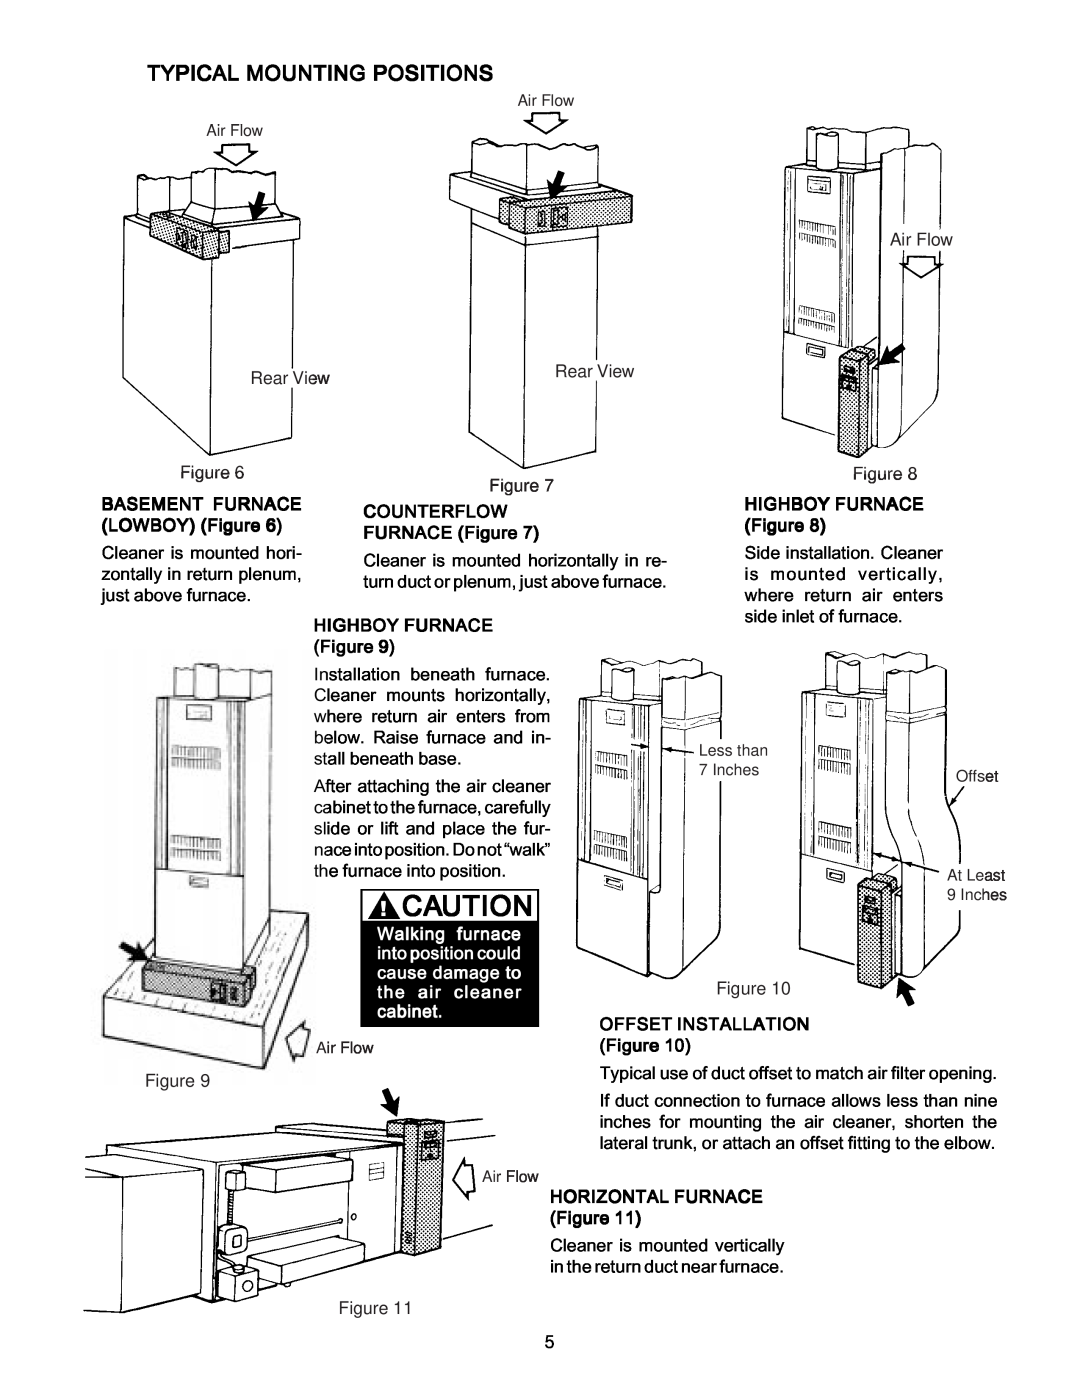 Emerson SST2000 manual Typical Mounting Positions, Walking furnace, into position could, cause damage to, the air cleaner 